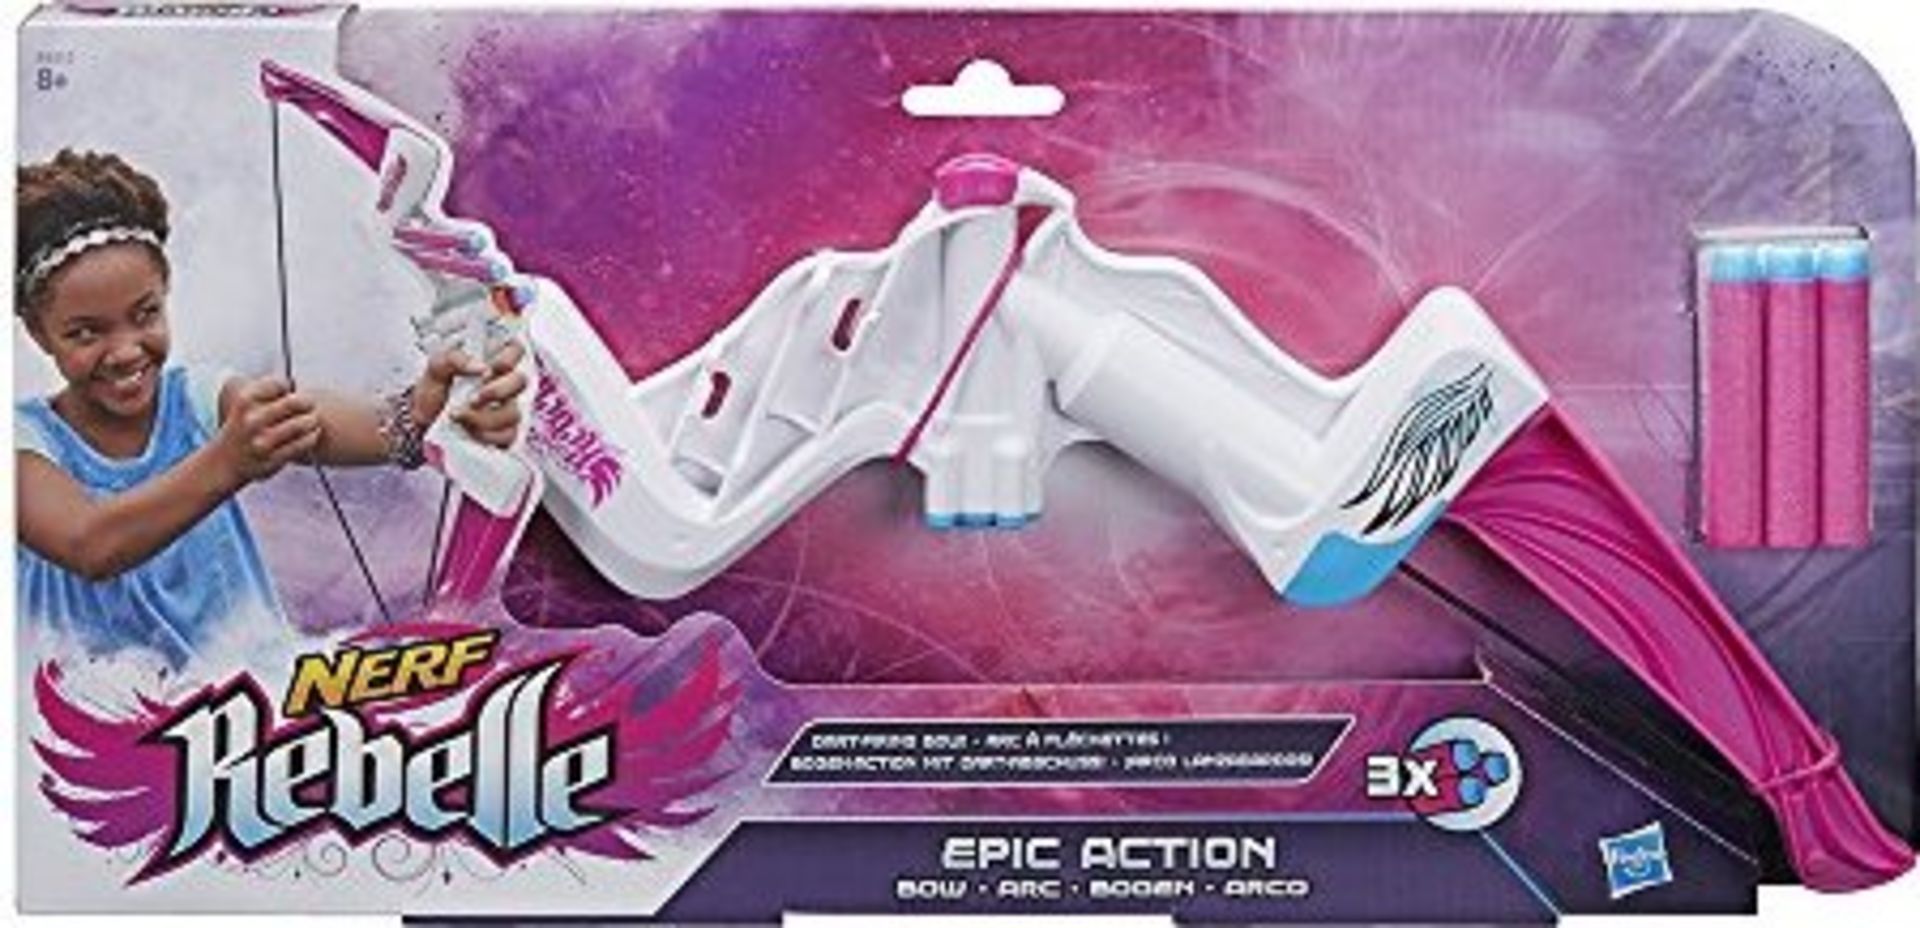 V Brand New Nerf Rebelle Epic Action Bow With Three Darts - Online Price £11.99 (